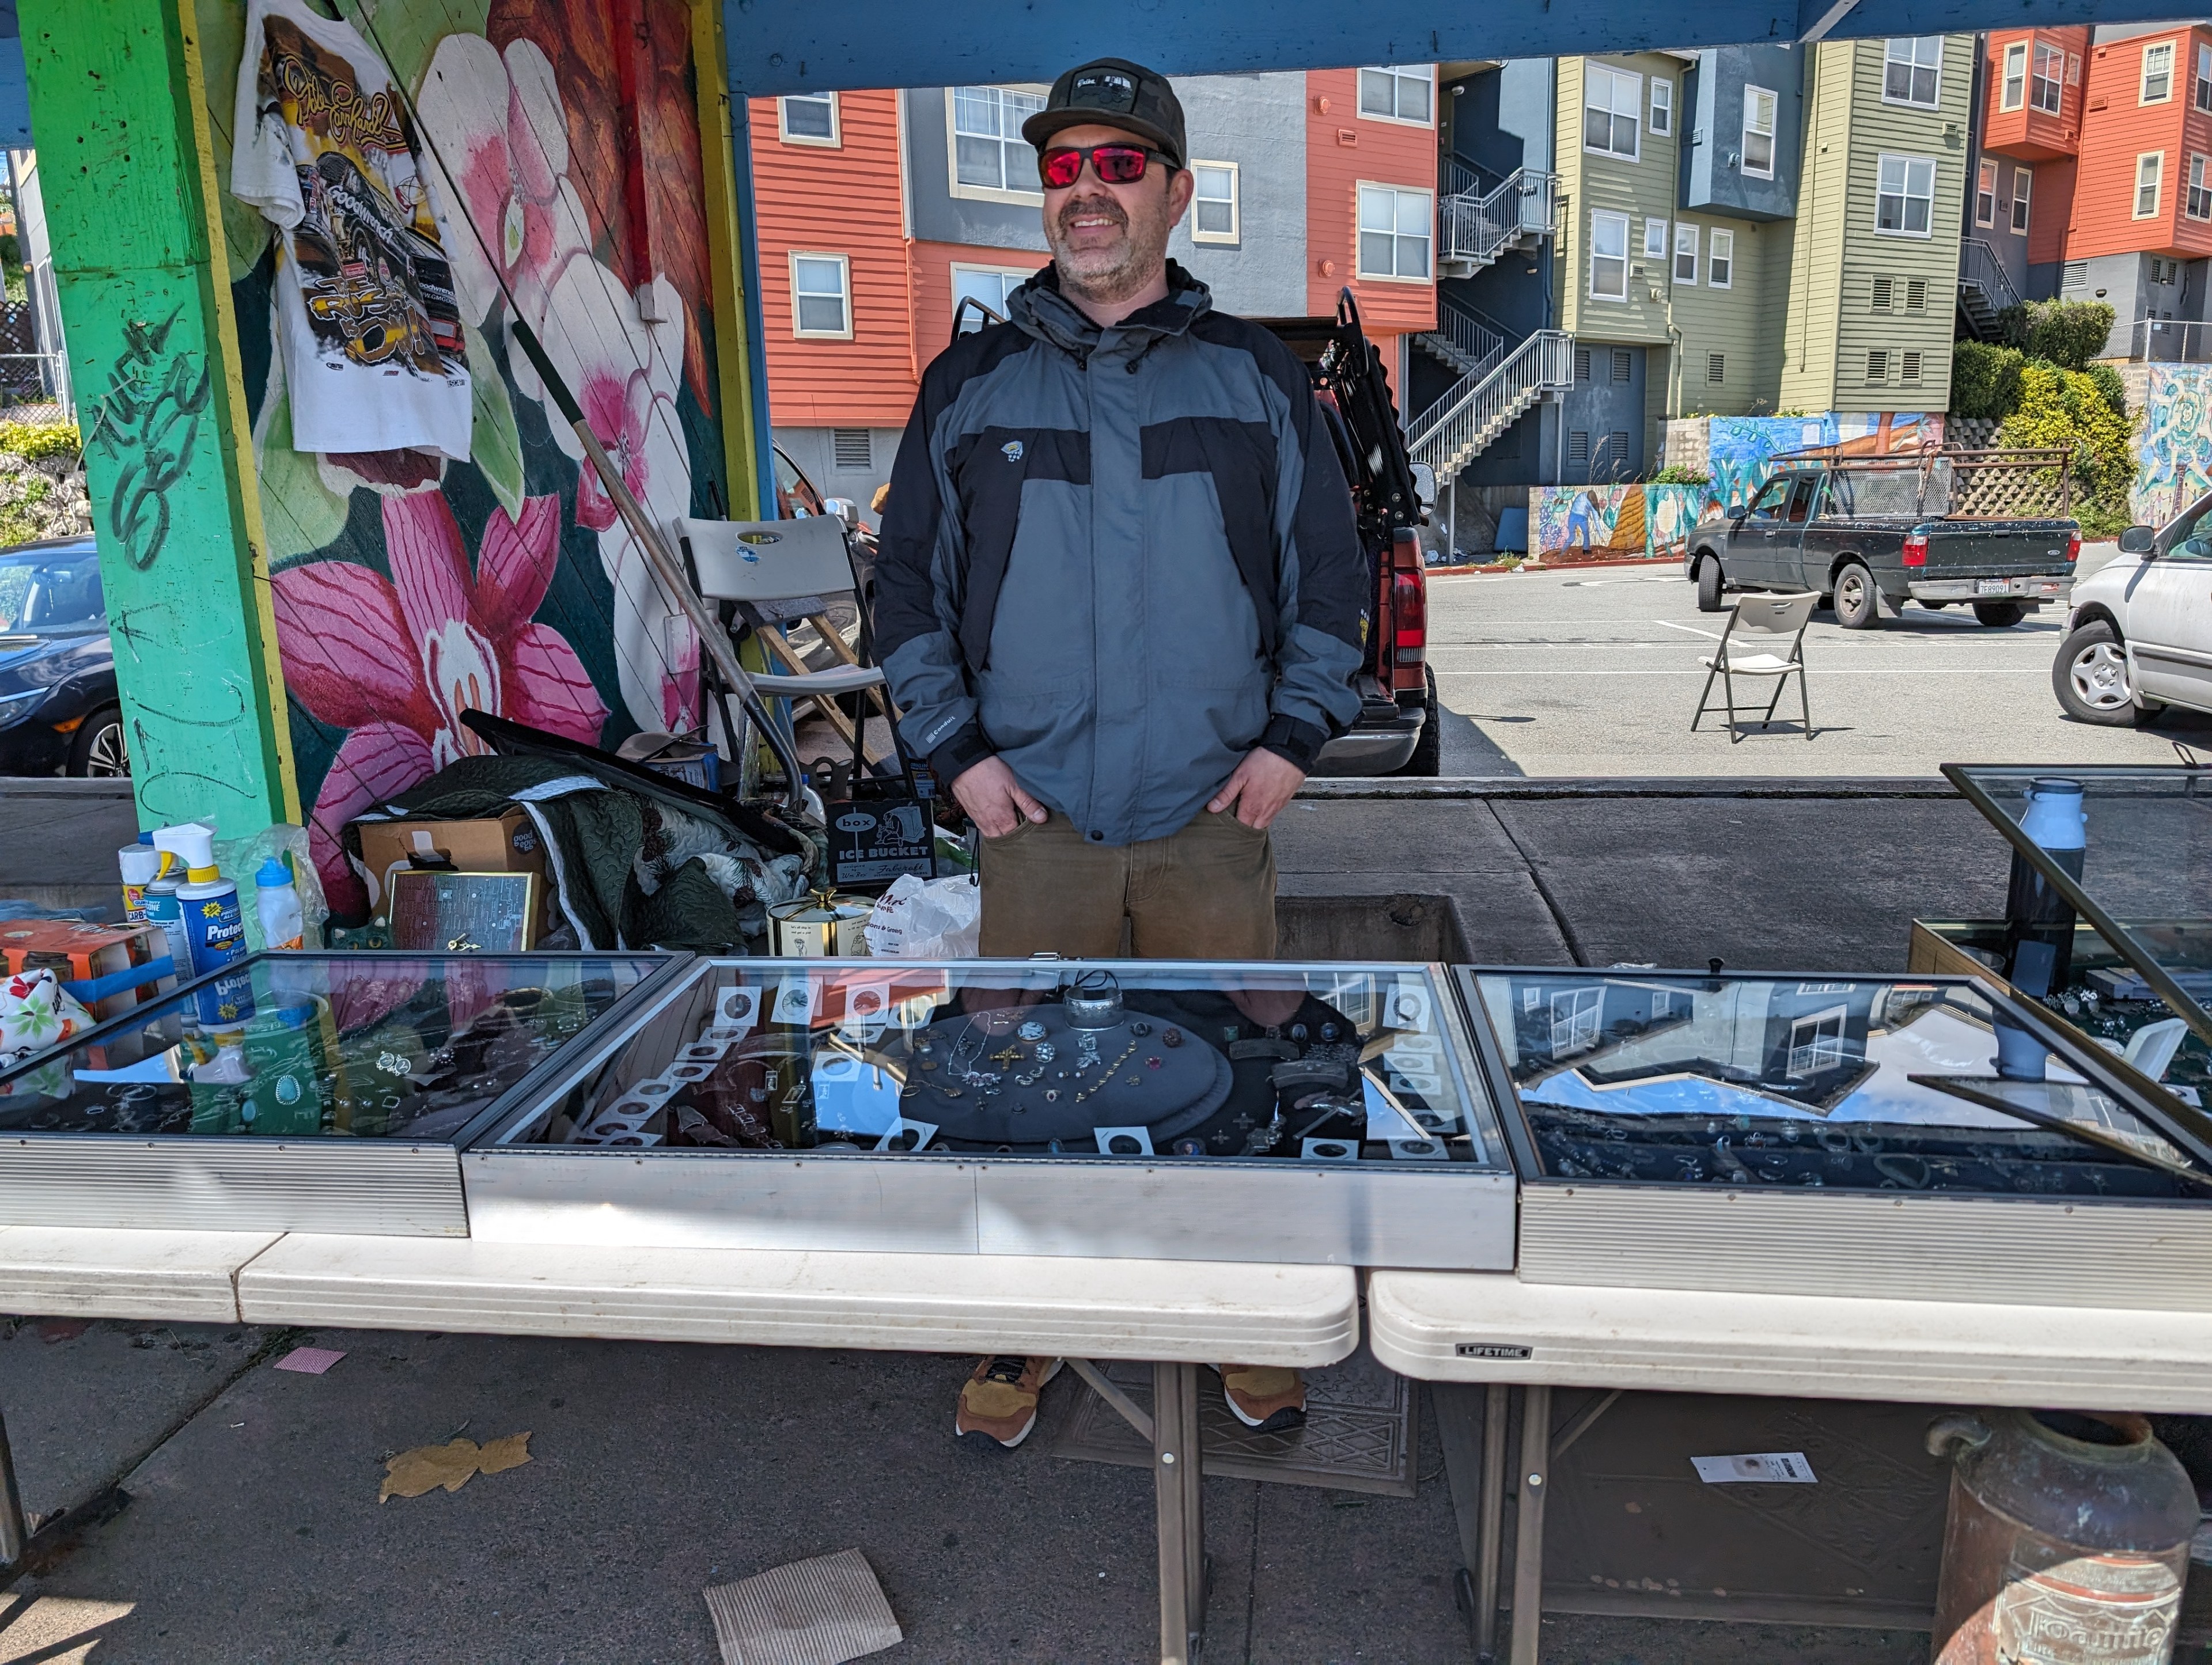 A man in a gray and black jacket, black cap and sunglasses stands behind a table laden with metal cases containing jewelry for sale.